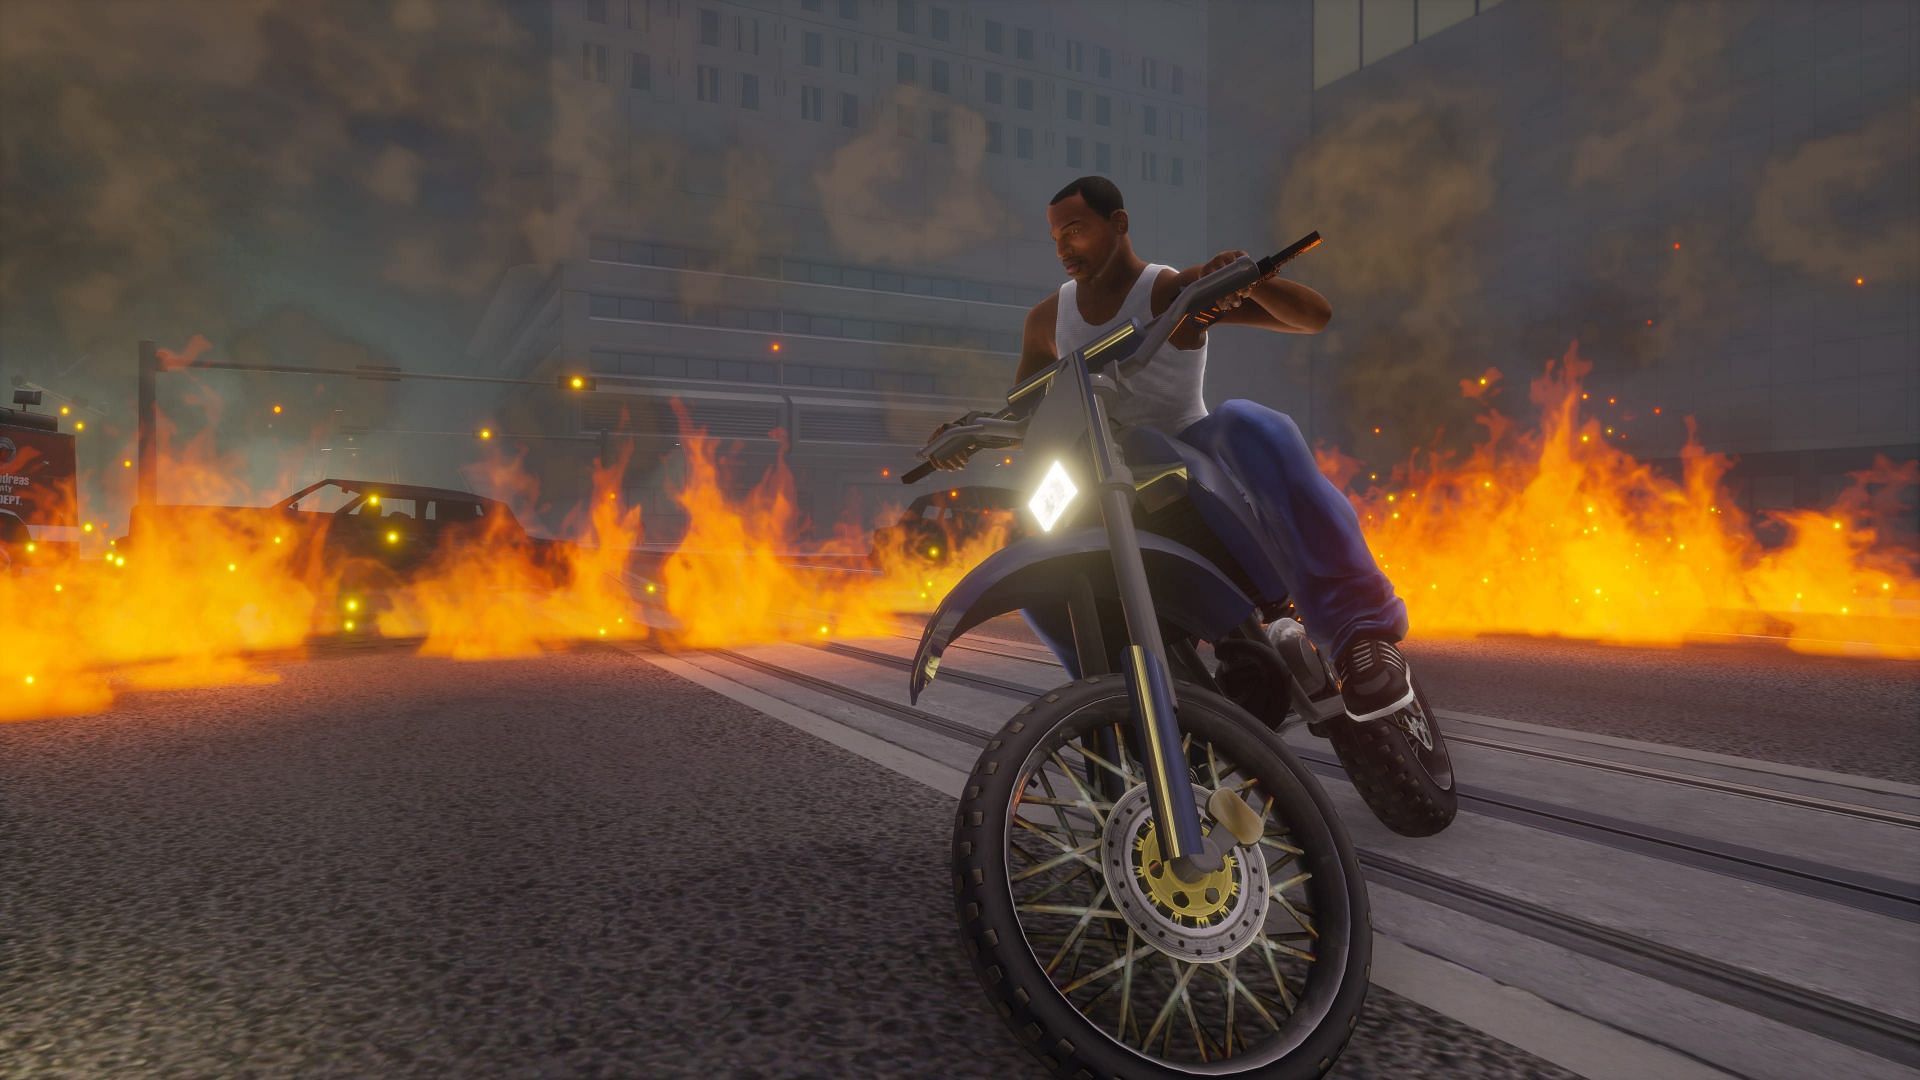 Fans should expect more mobile games on the horizon (Image via Rockstar Games)